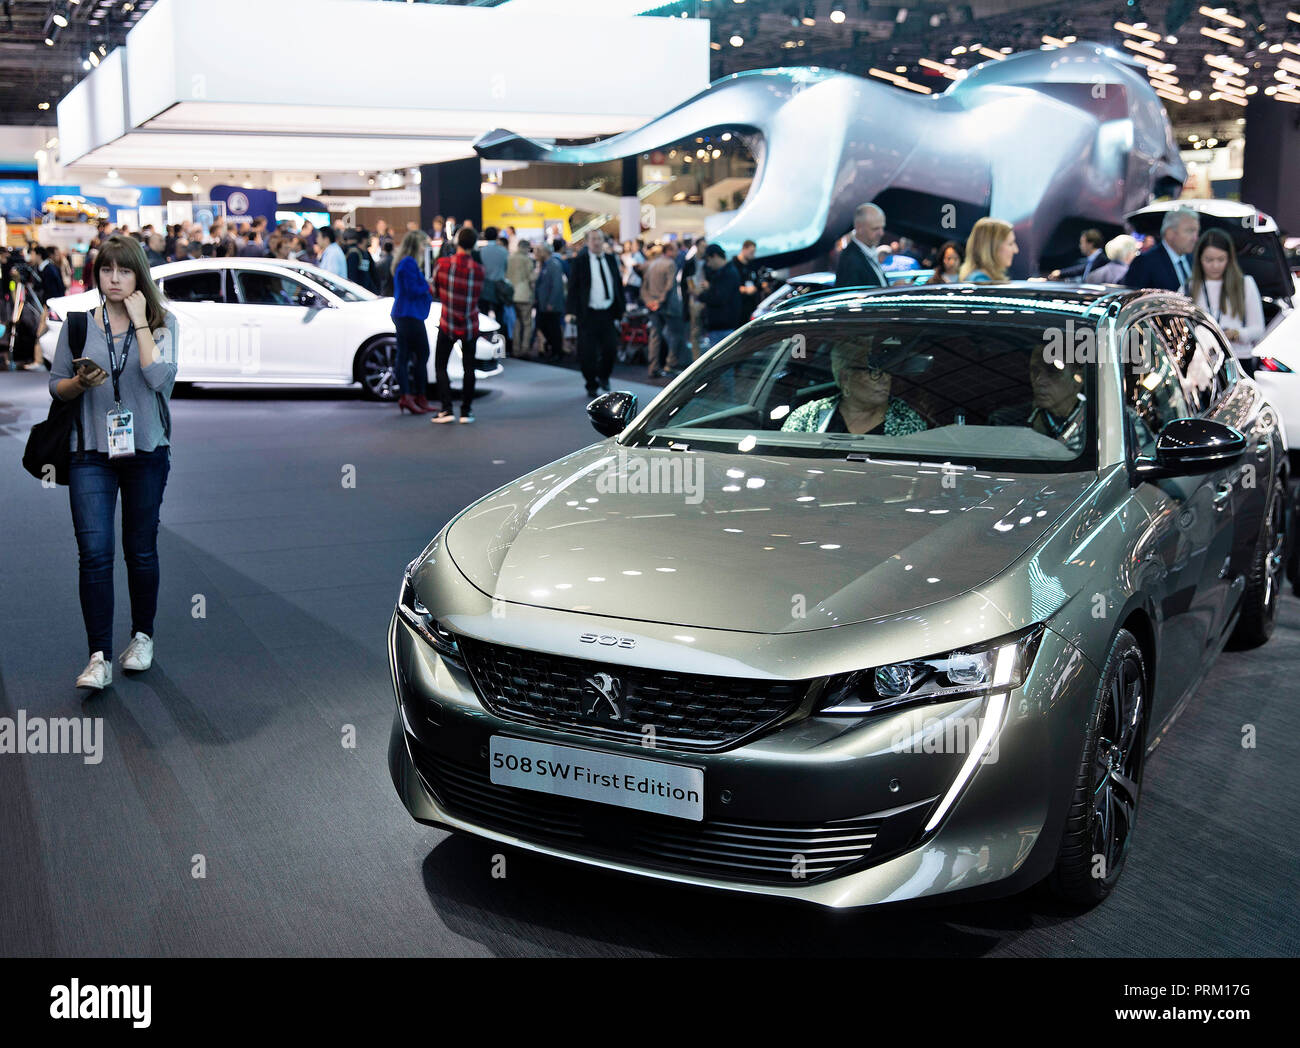 Peugeot 508 SW during the second day of International Paris Motorshow on Wednesday, October 3rd, 2018 in Paris, France. (CTK Photo/Petr Mlch) Stock Photo